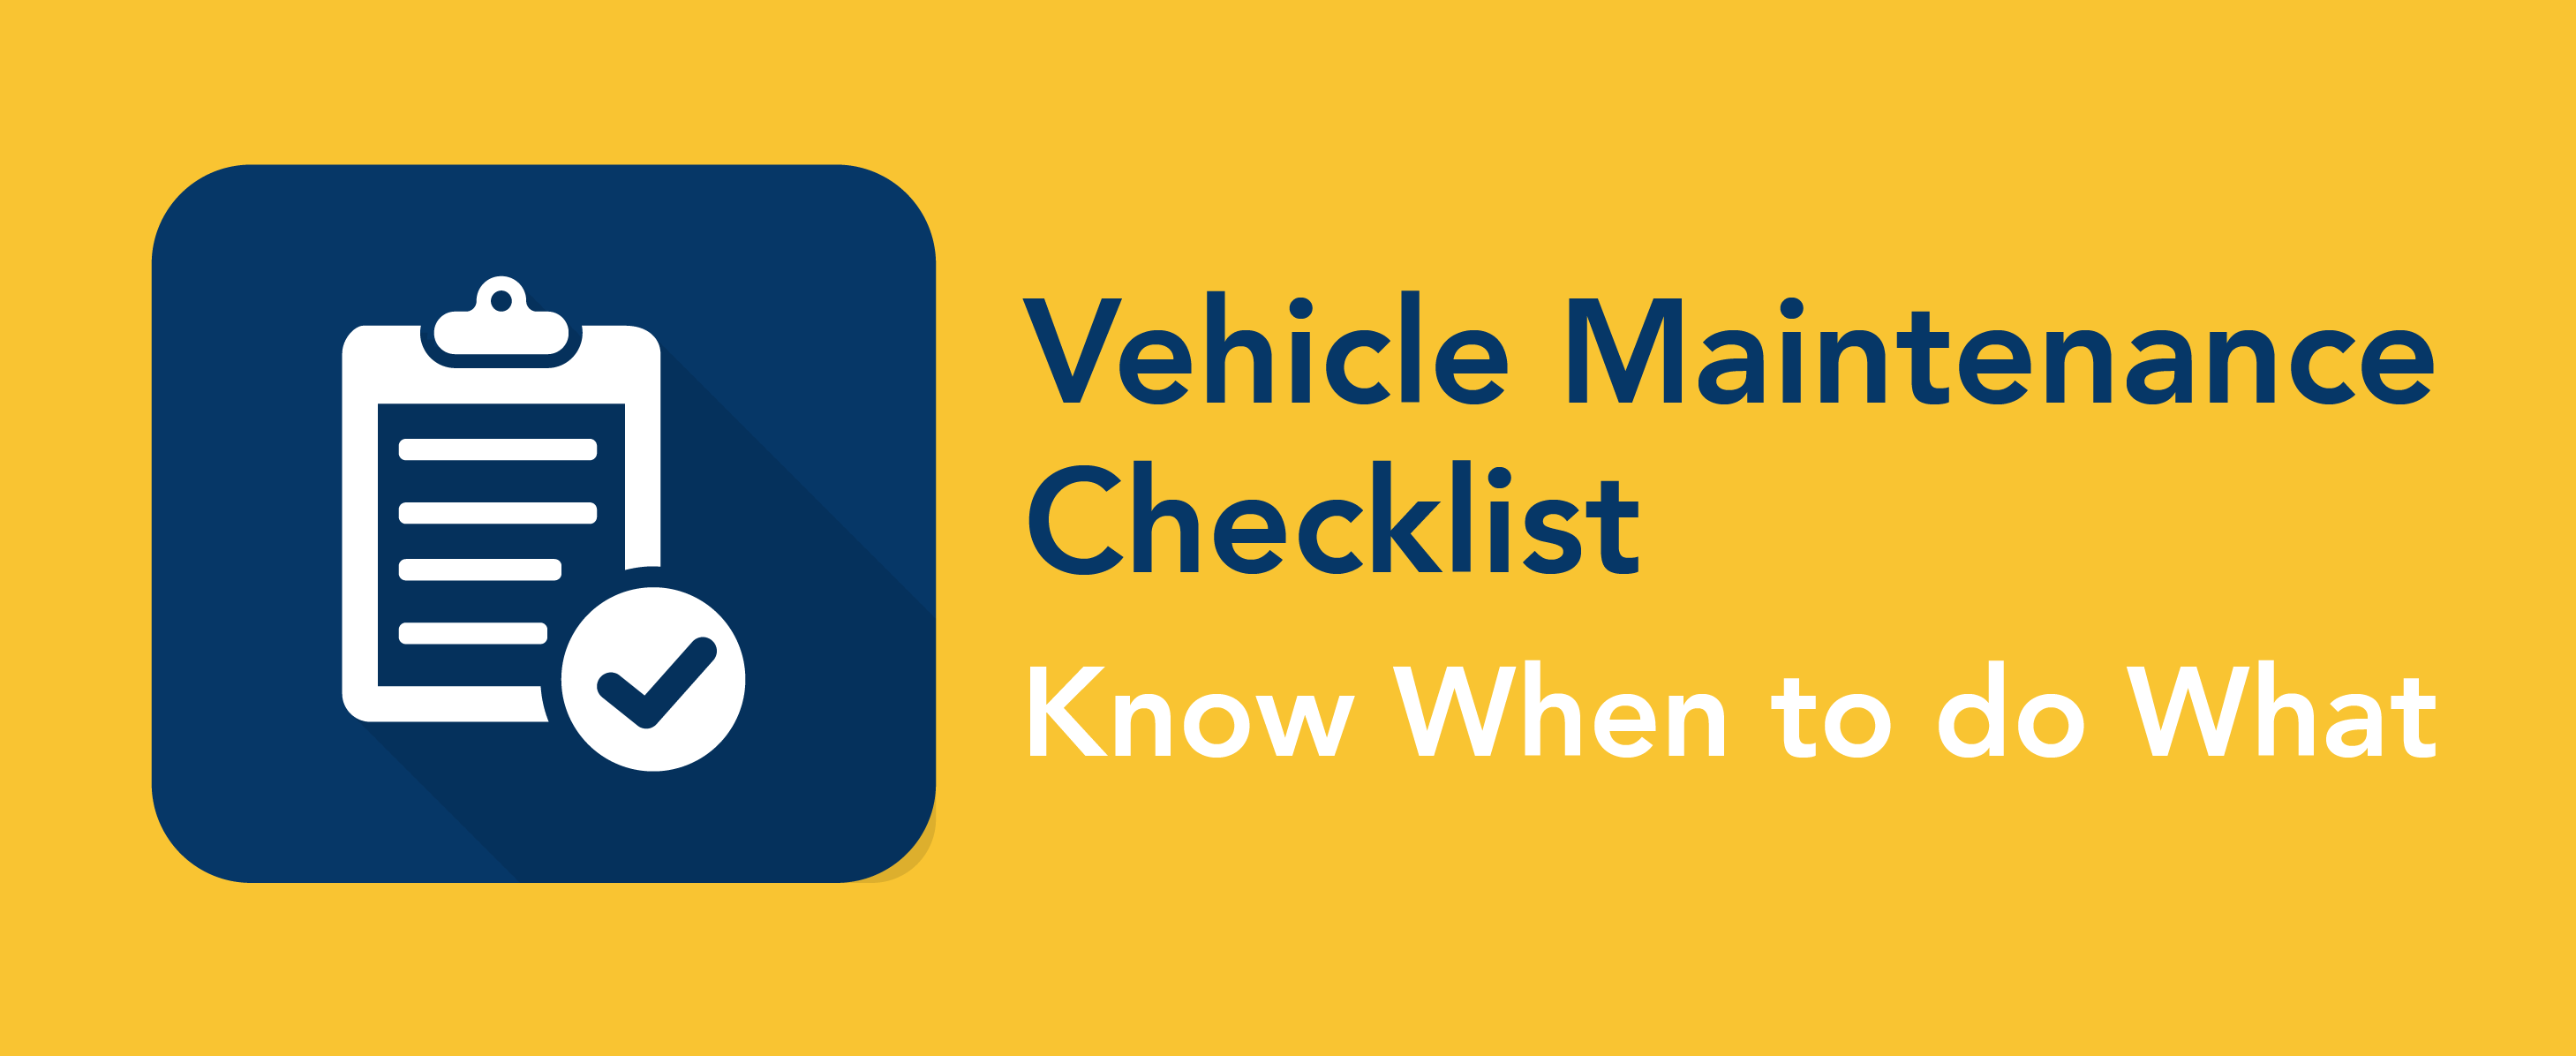 Vehicle Maintenance Checklist: Know when to do what. *clipboard graphic*